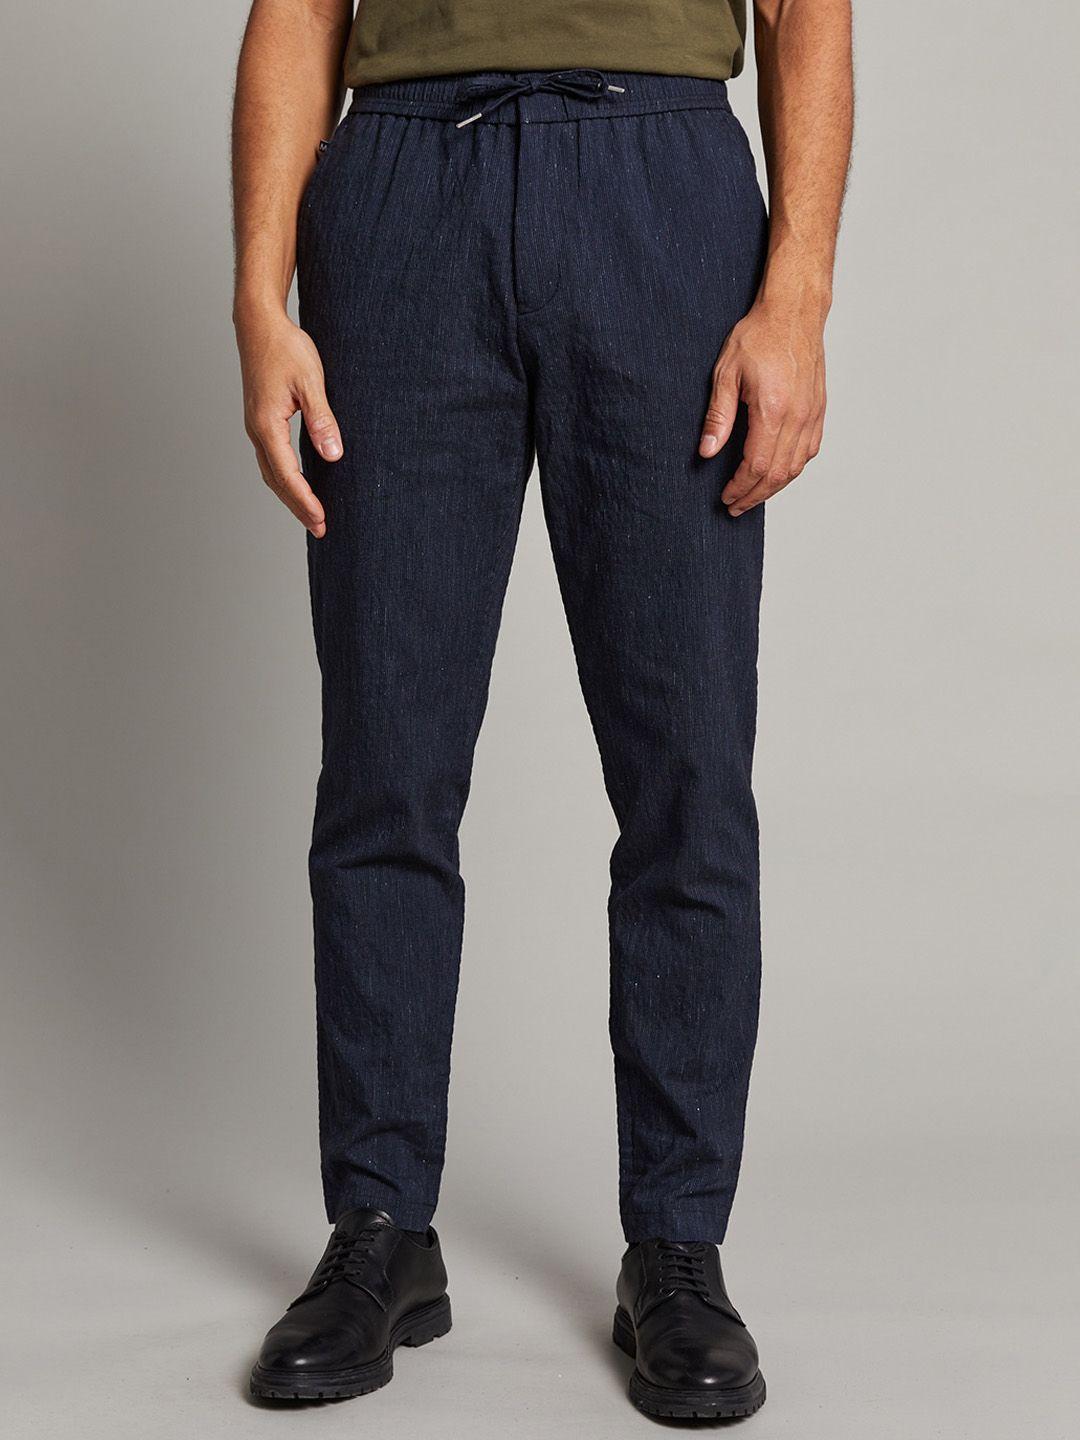 matinique men navy blue solid trousers